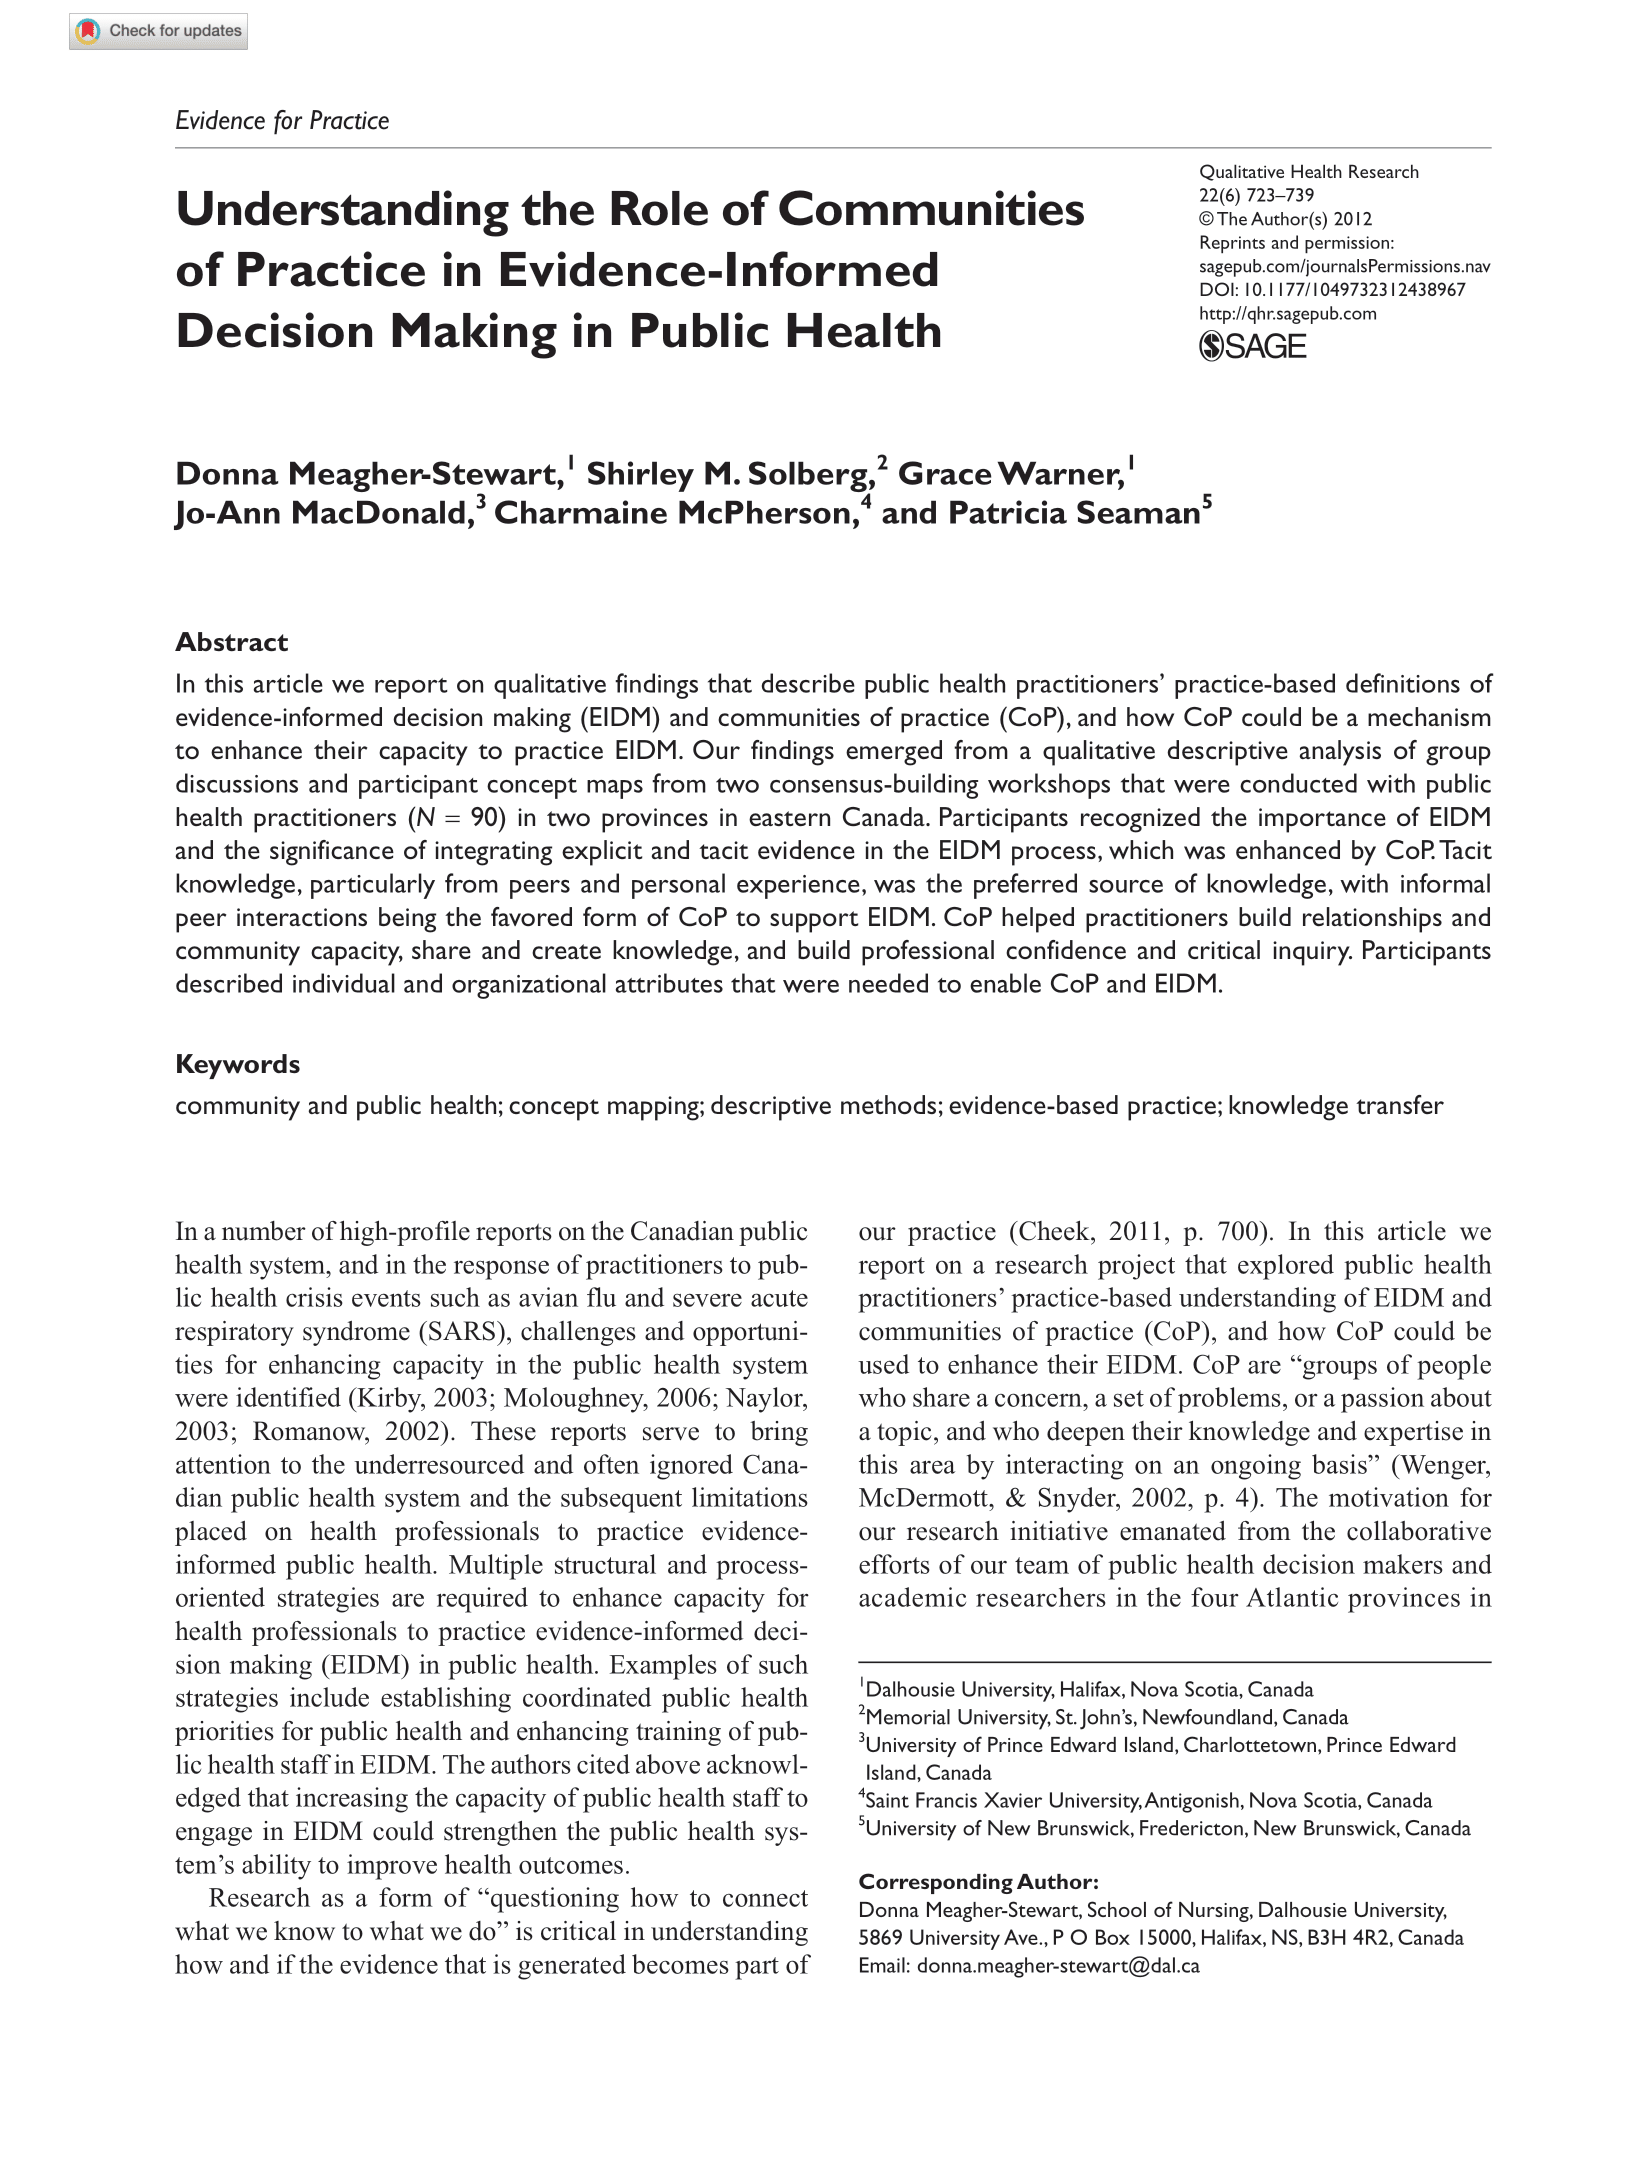 Understanding the Role of Communities of Practice in Evidence-Informed Decision Making in Public Health